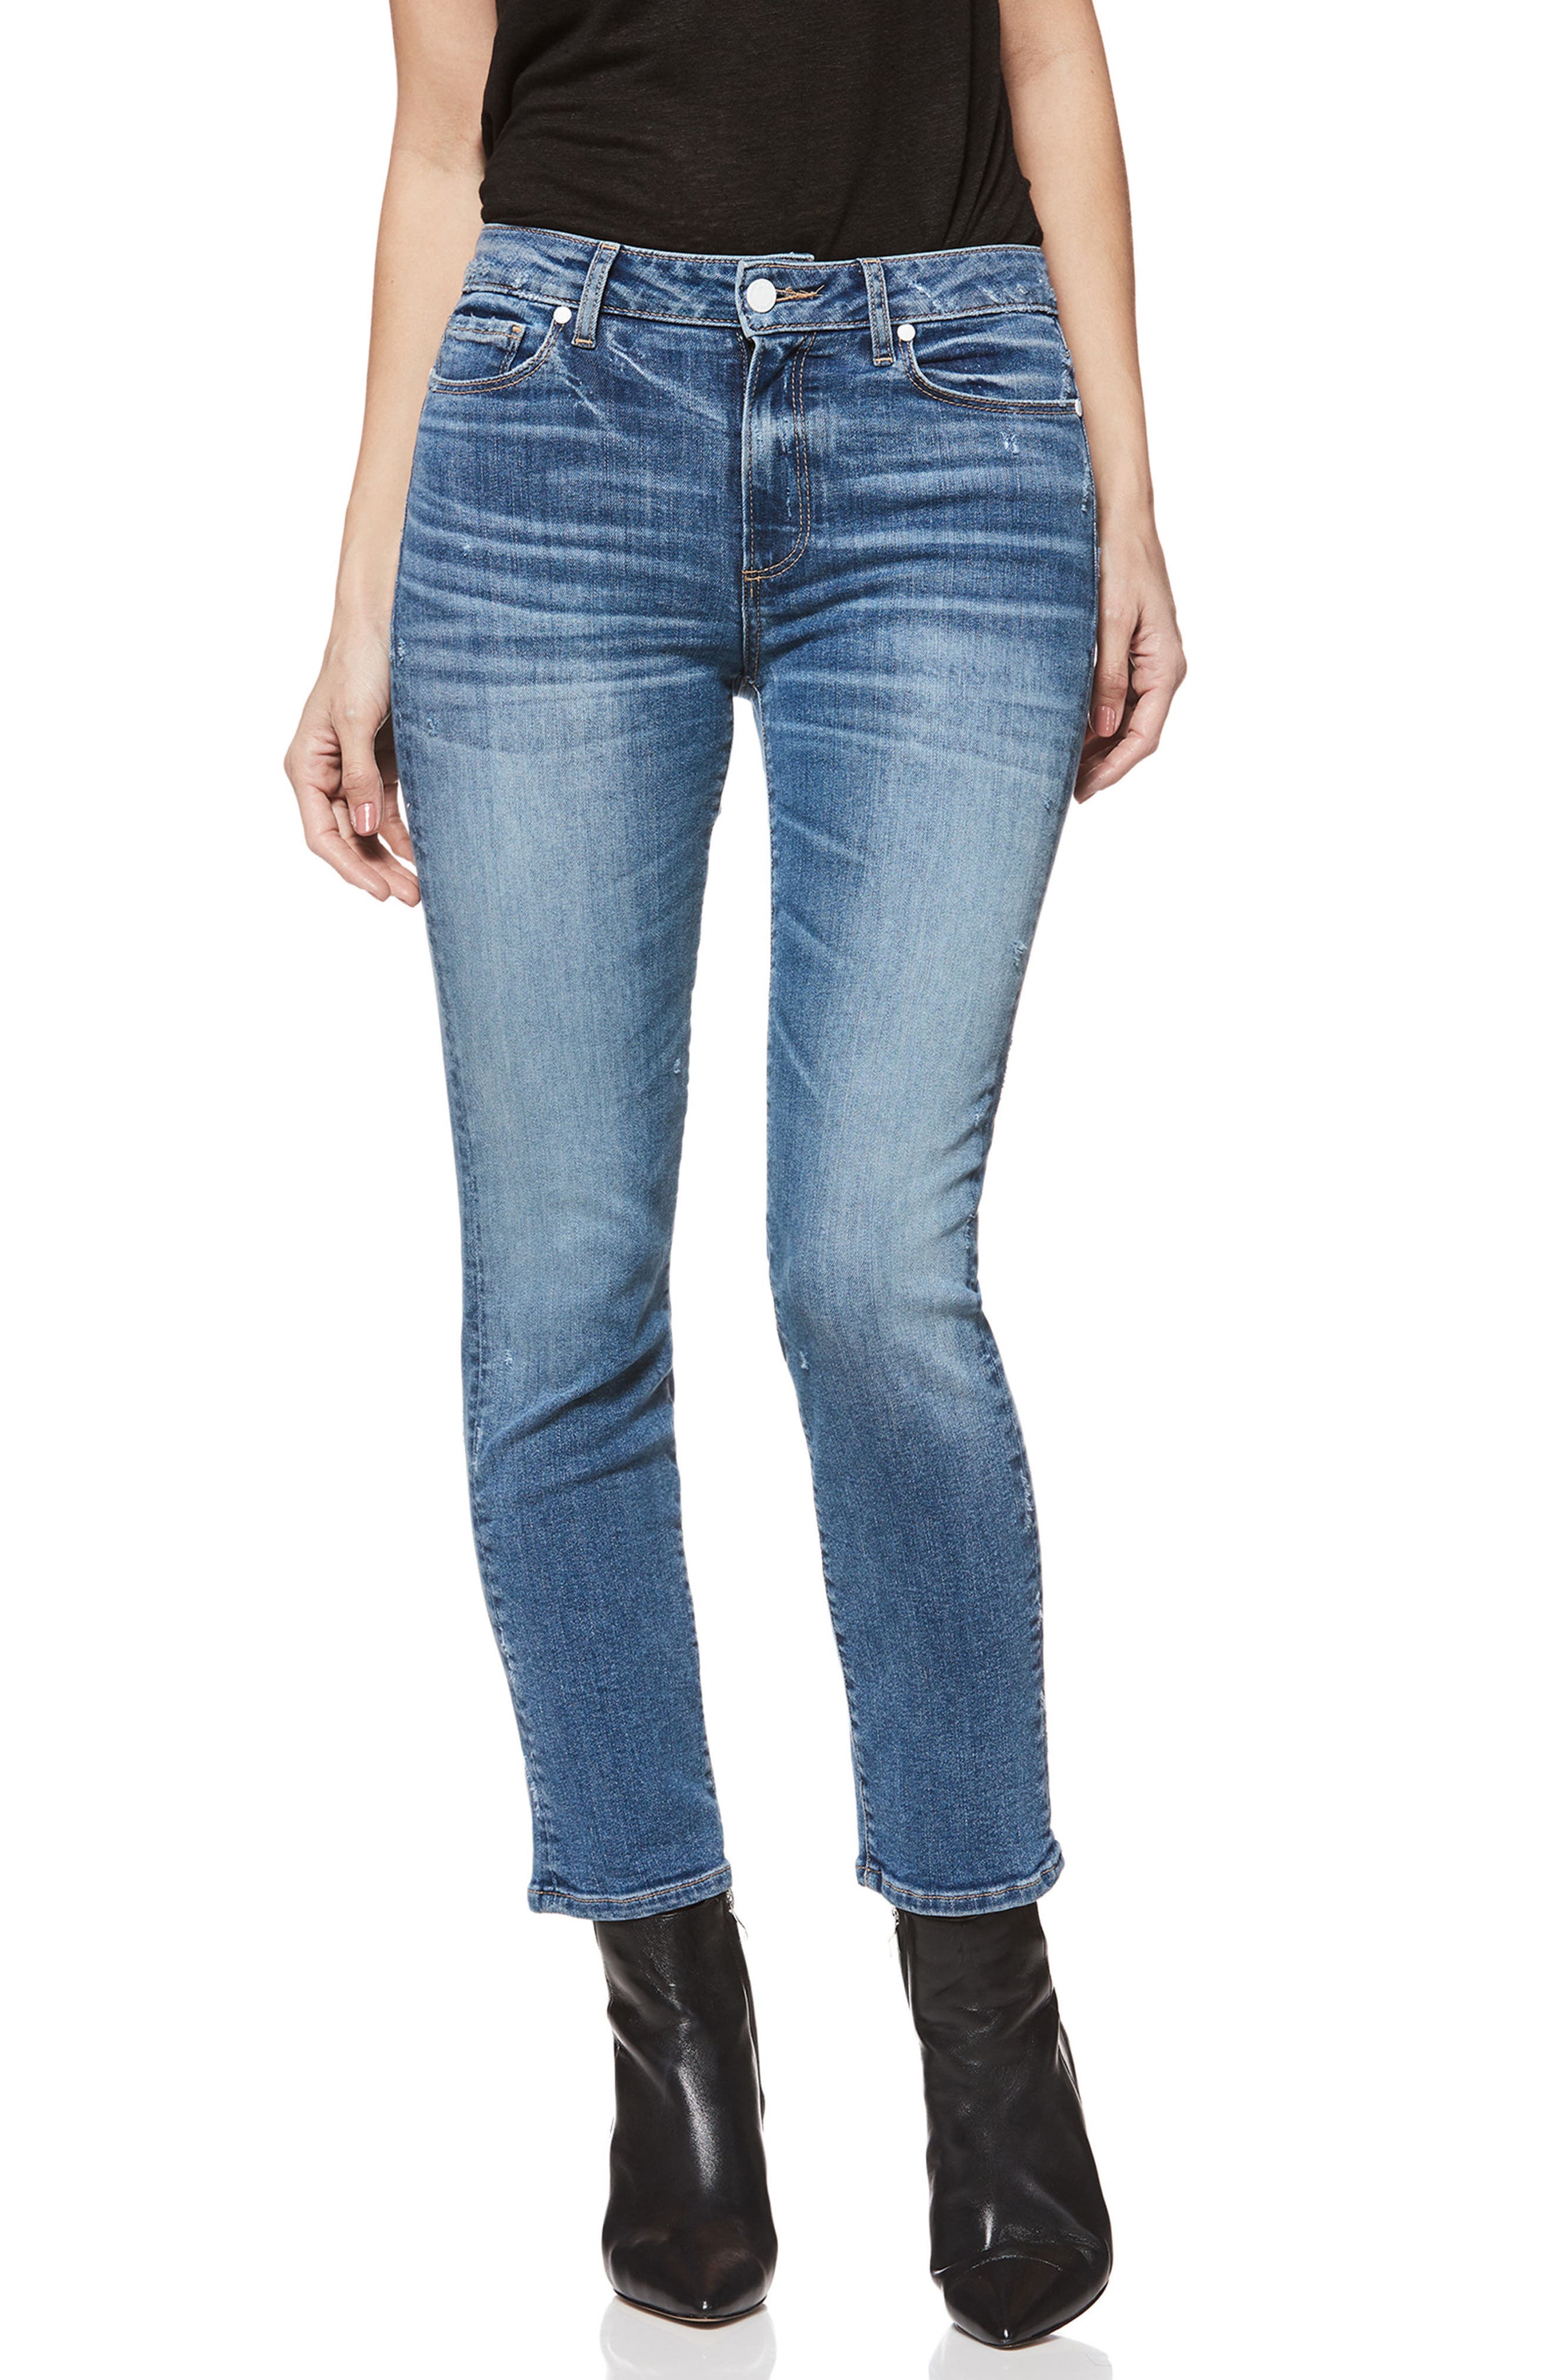 paige hoxton straight ankle jeans